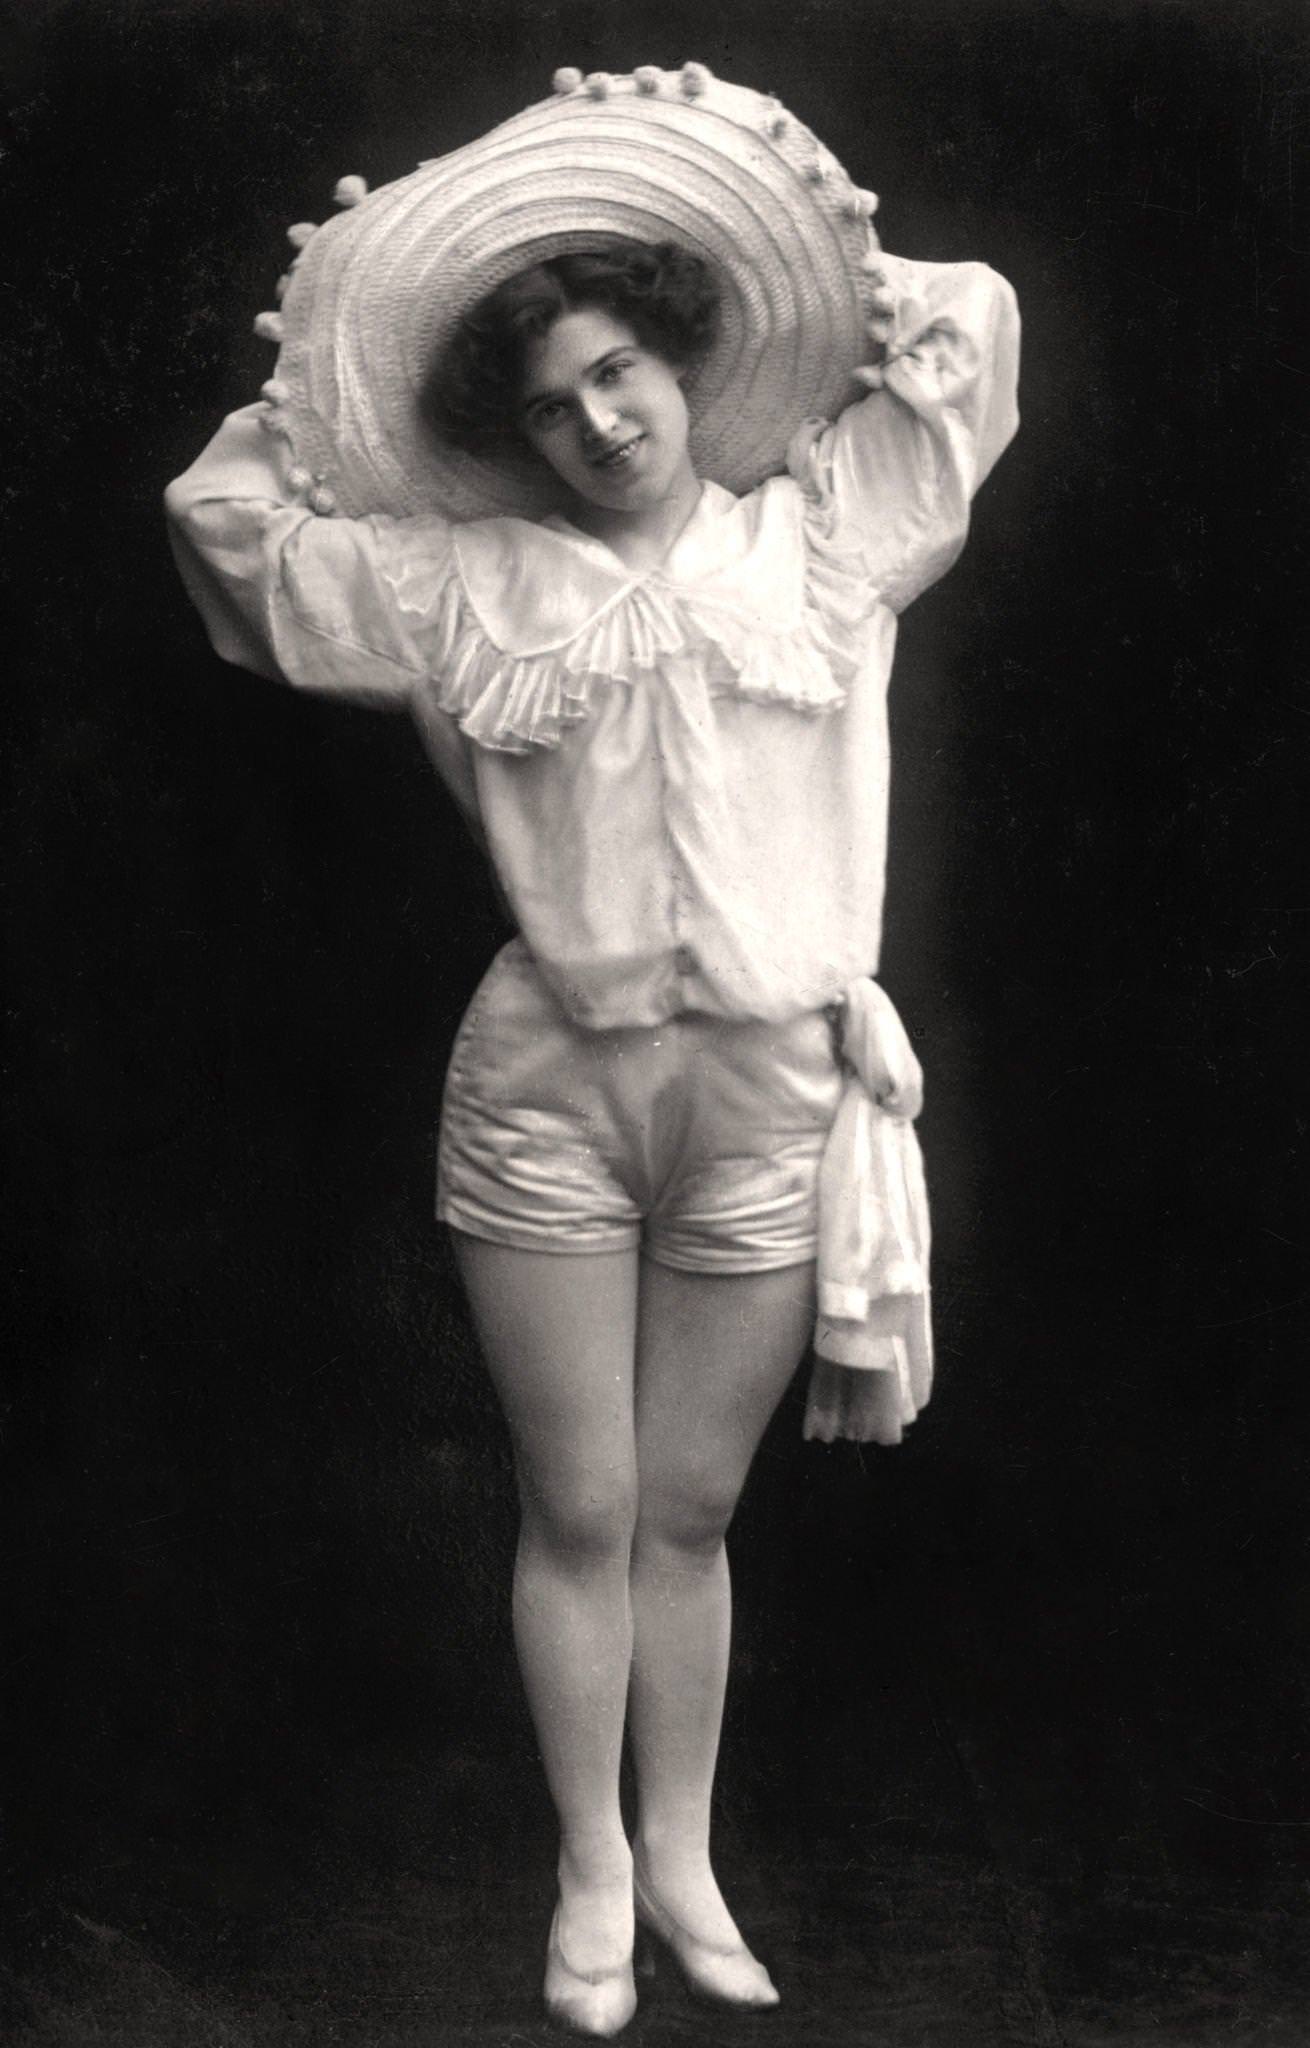 Millie Legarde poses for a portrait in 1906